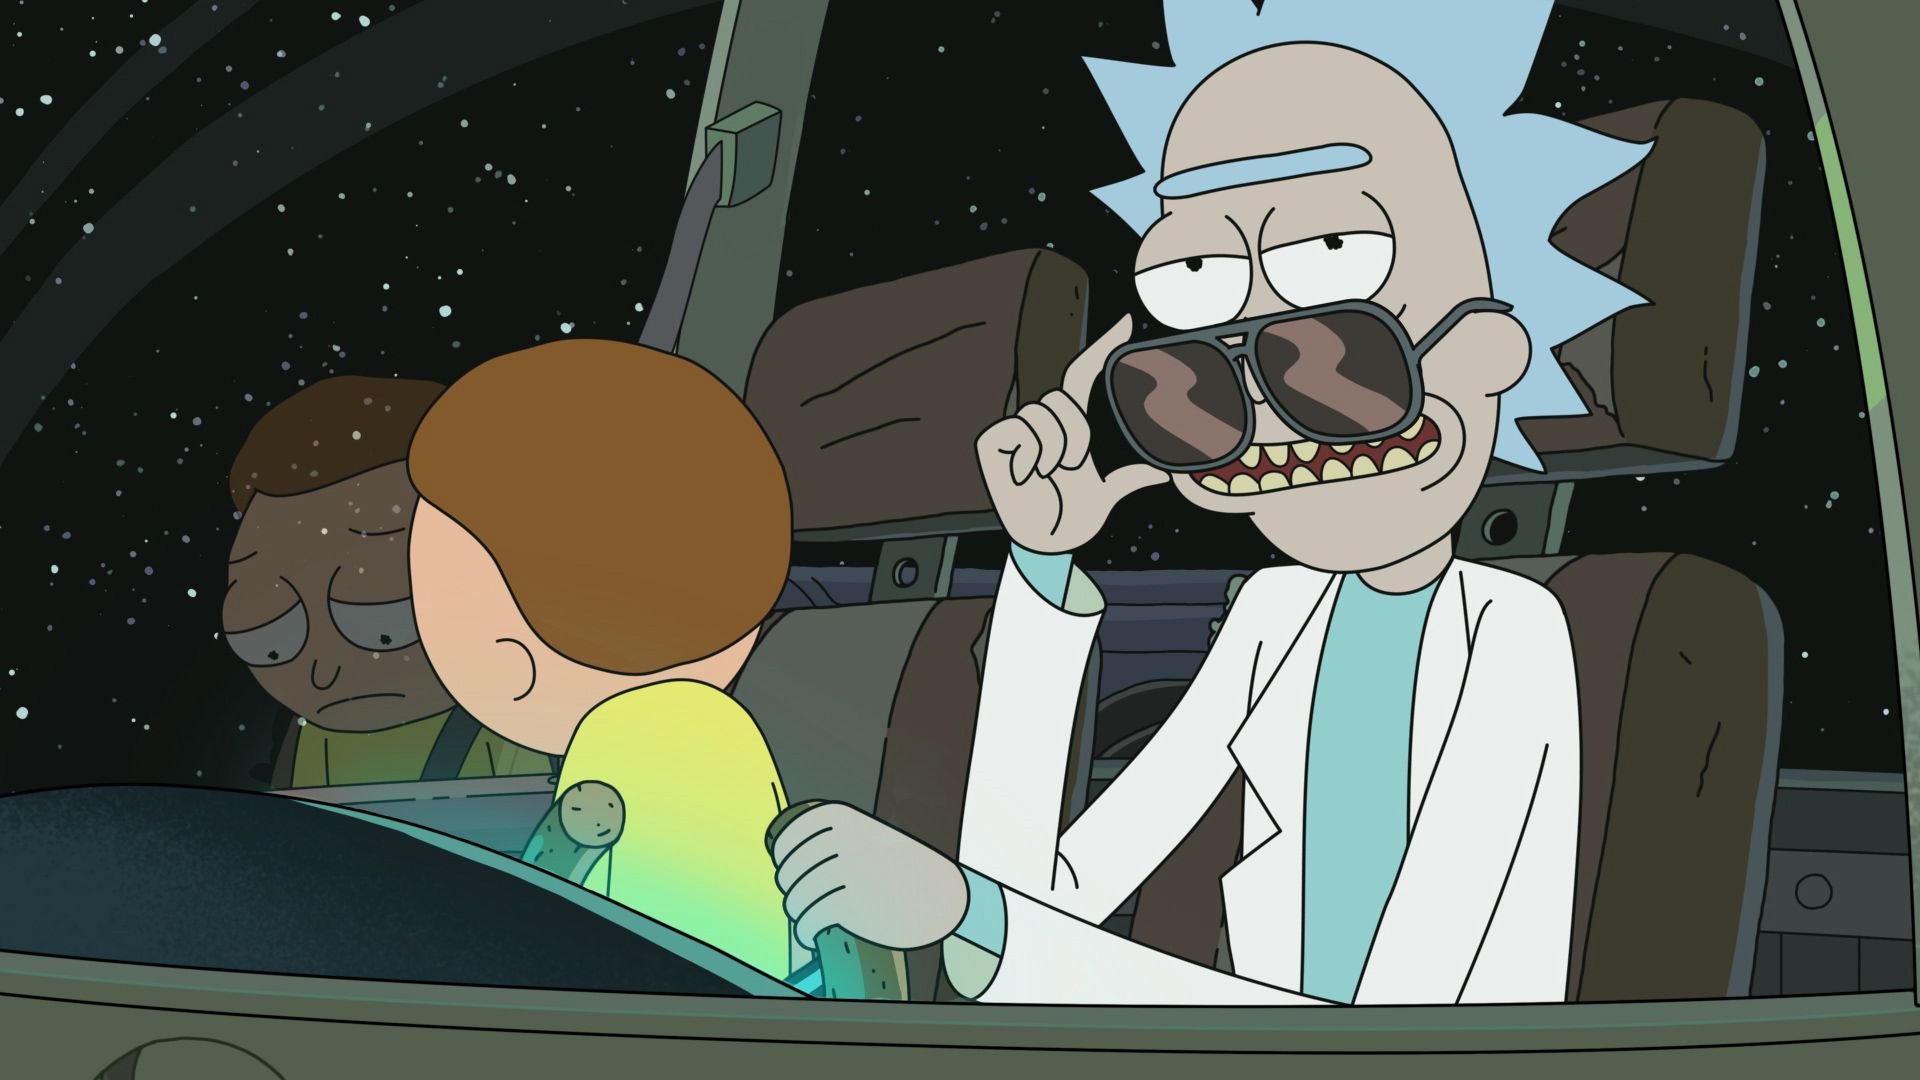 Season 5 of Rick and Morty “More on Schedule” Due to COVID-19